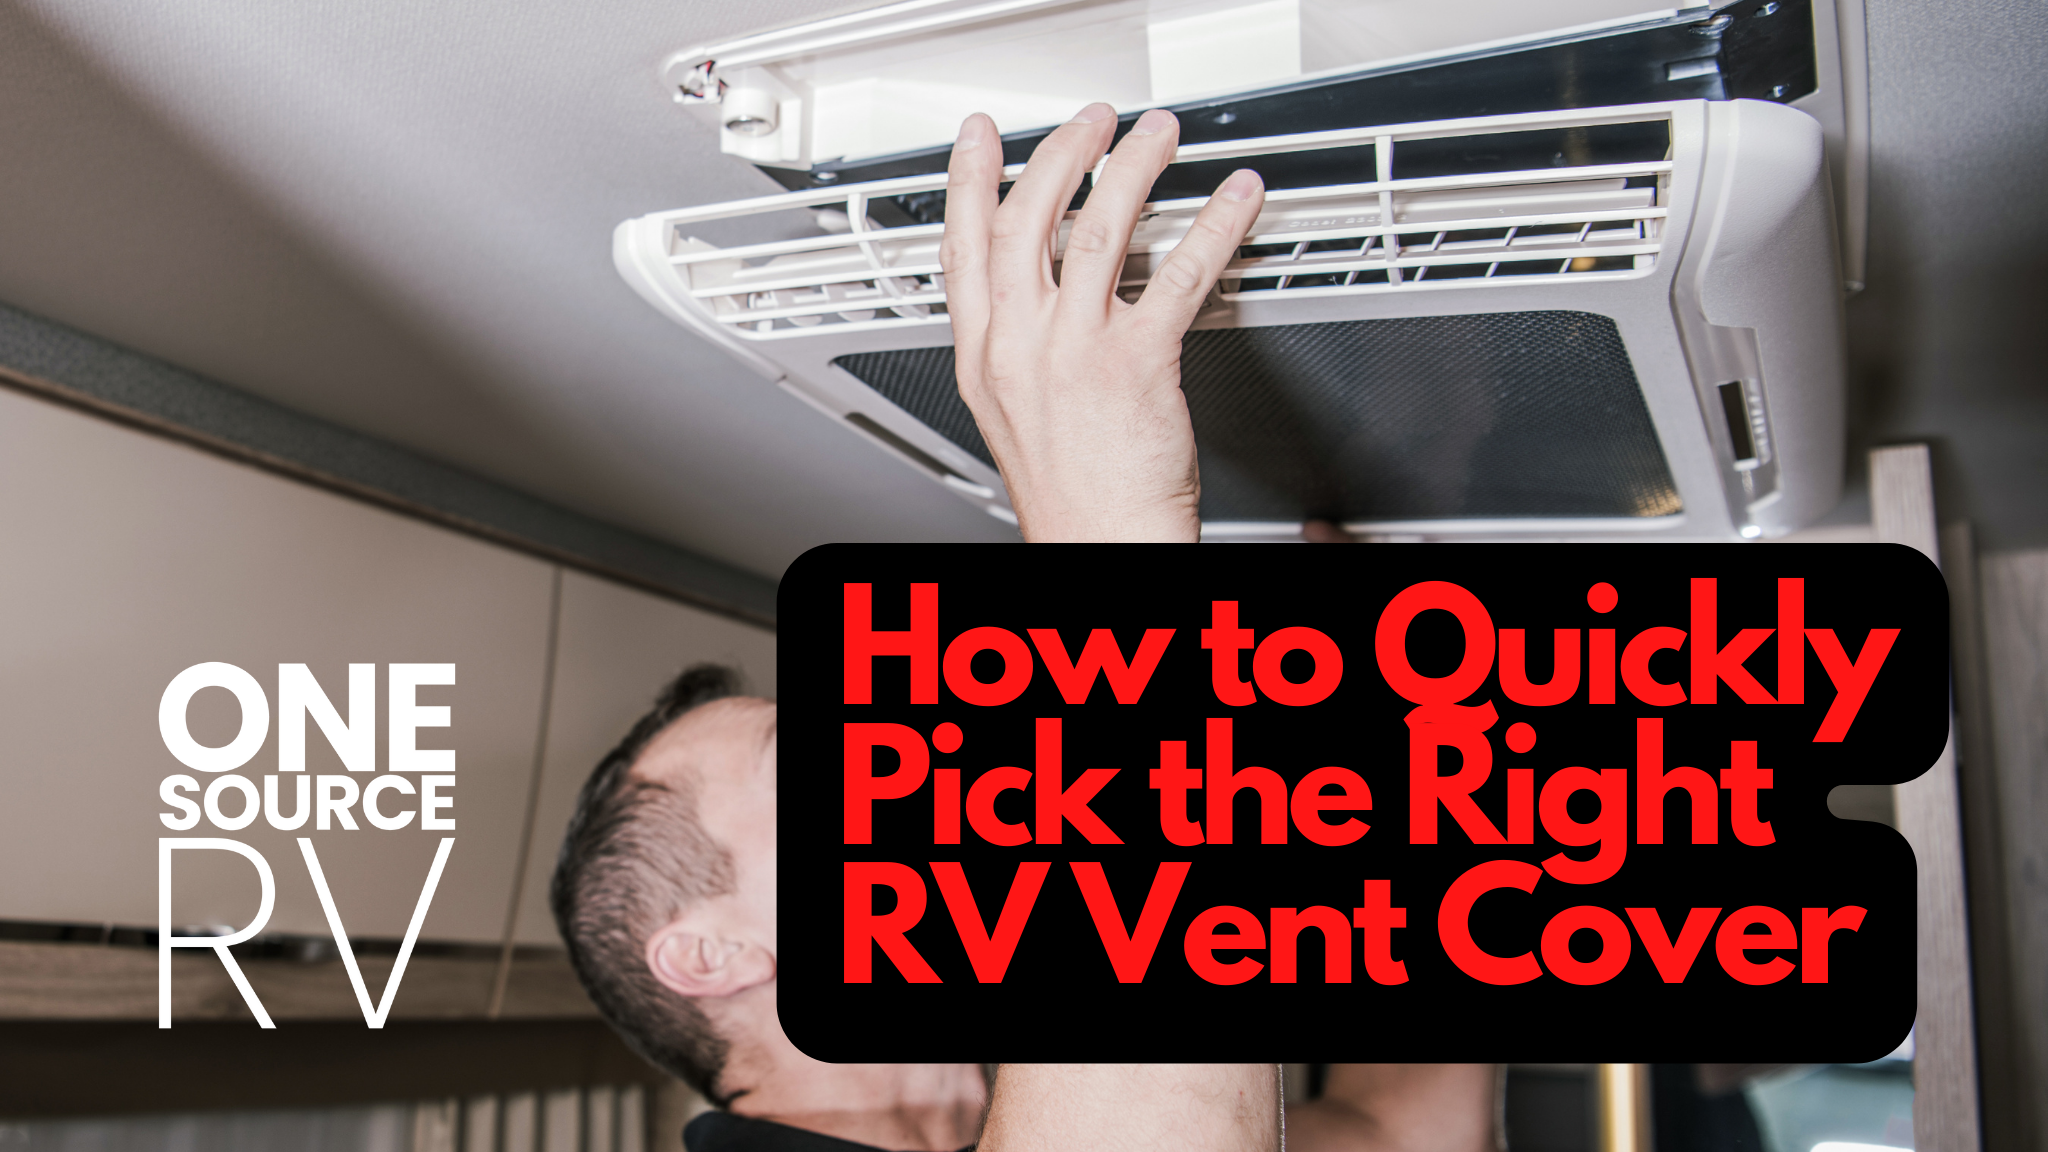 How to Quickly Pick the Right RV Vent Cover